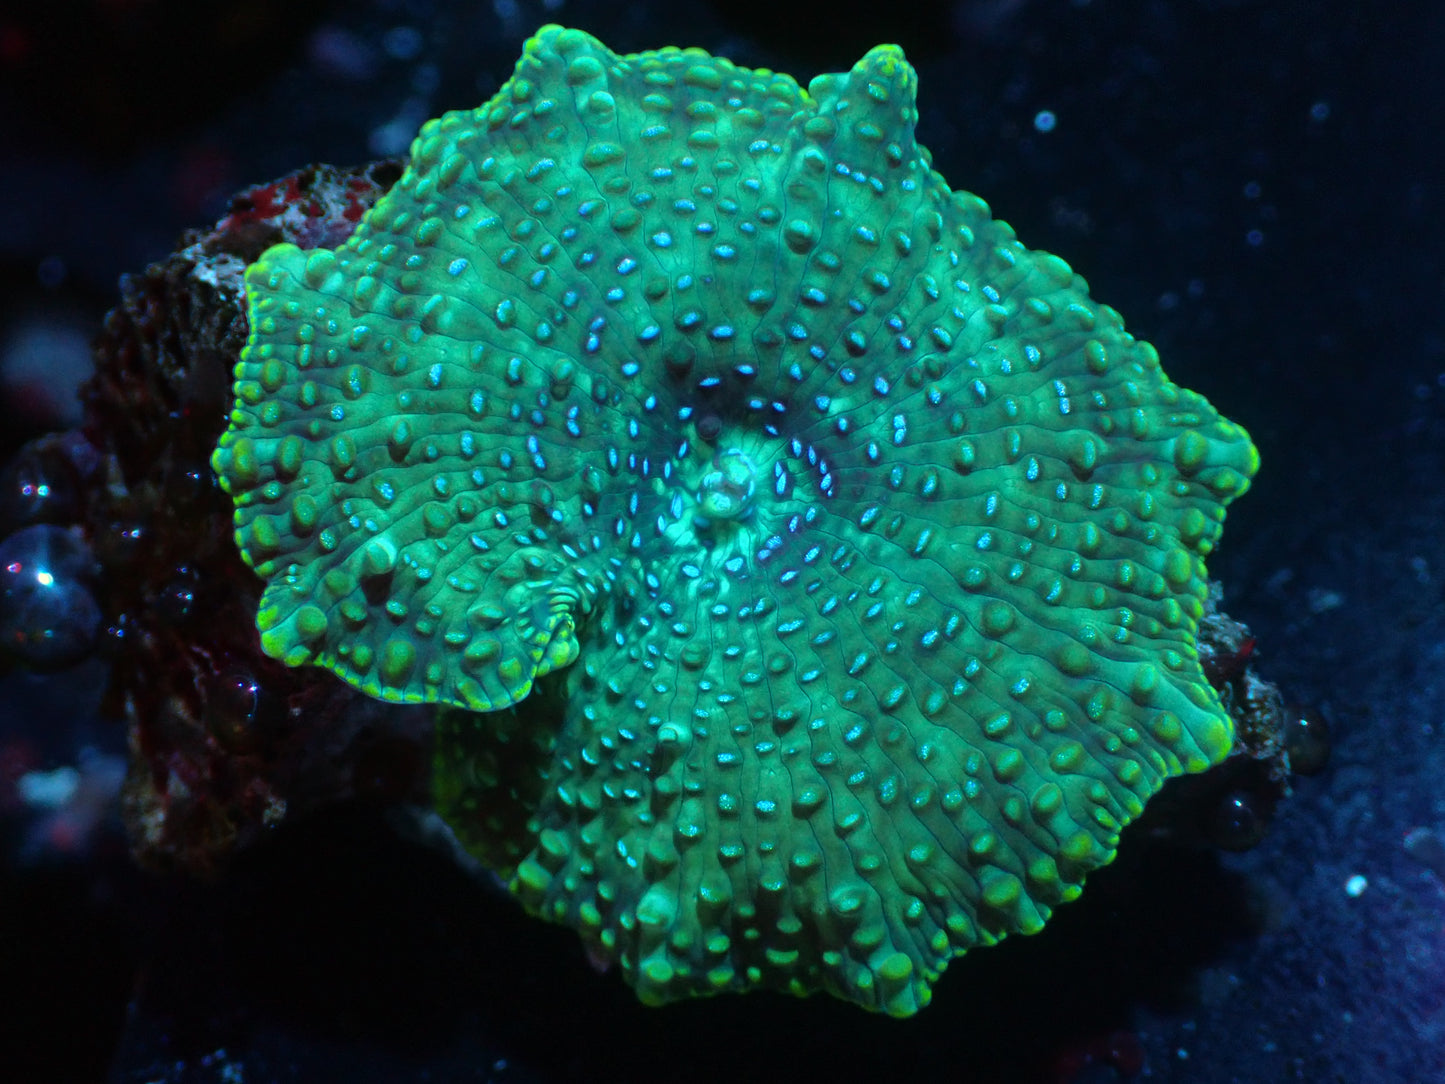 Blue Speckled Discosoma Auctions 4/29 ended